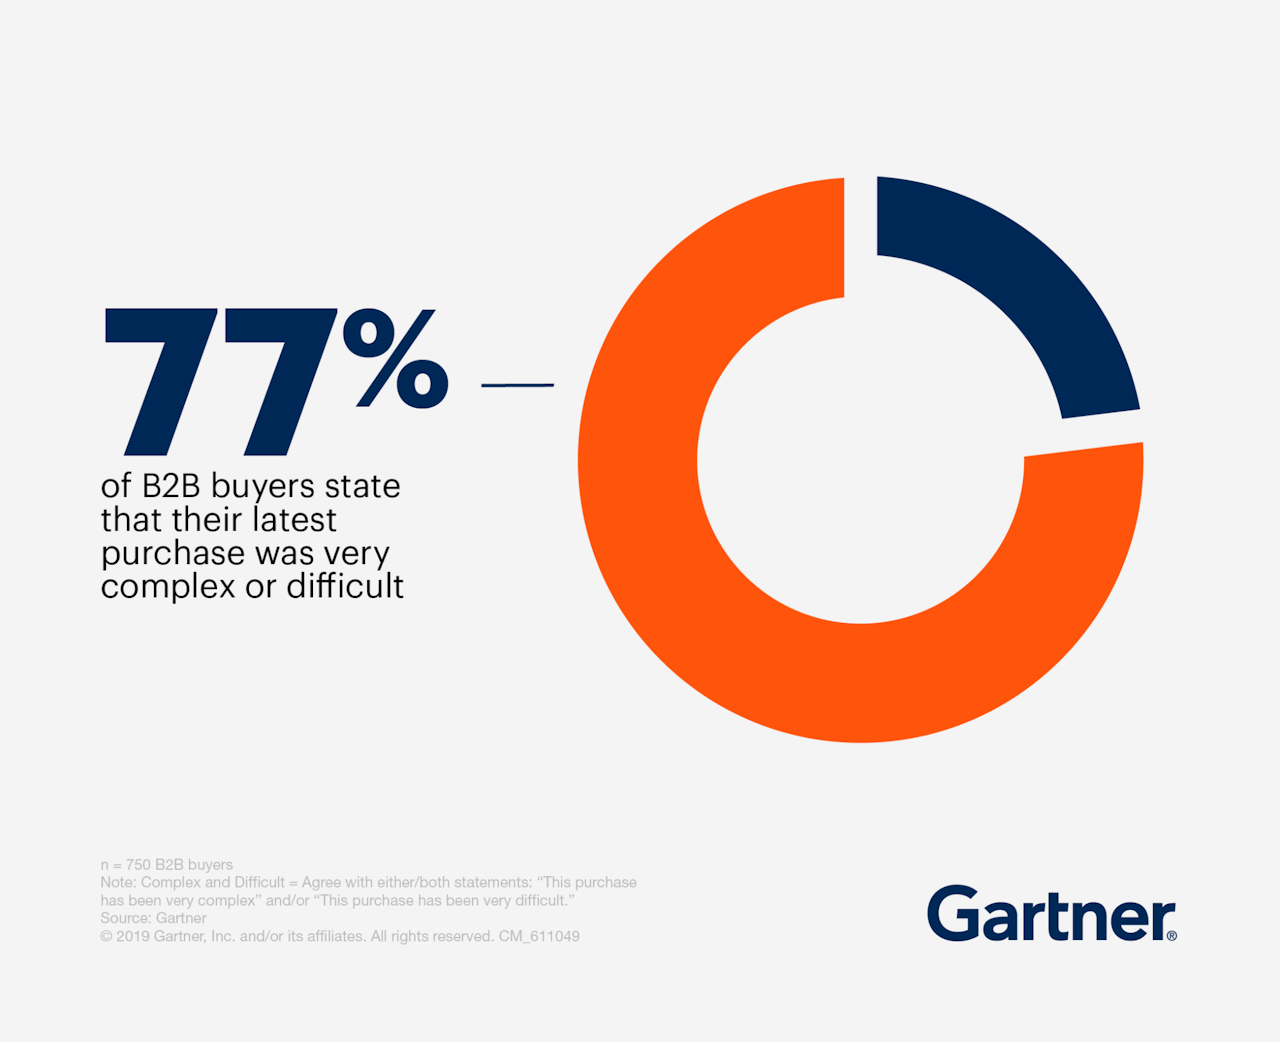 77% of B2B buyers state that their latest purchase was very complex or difficult